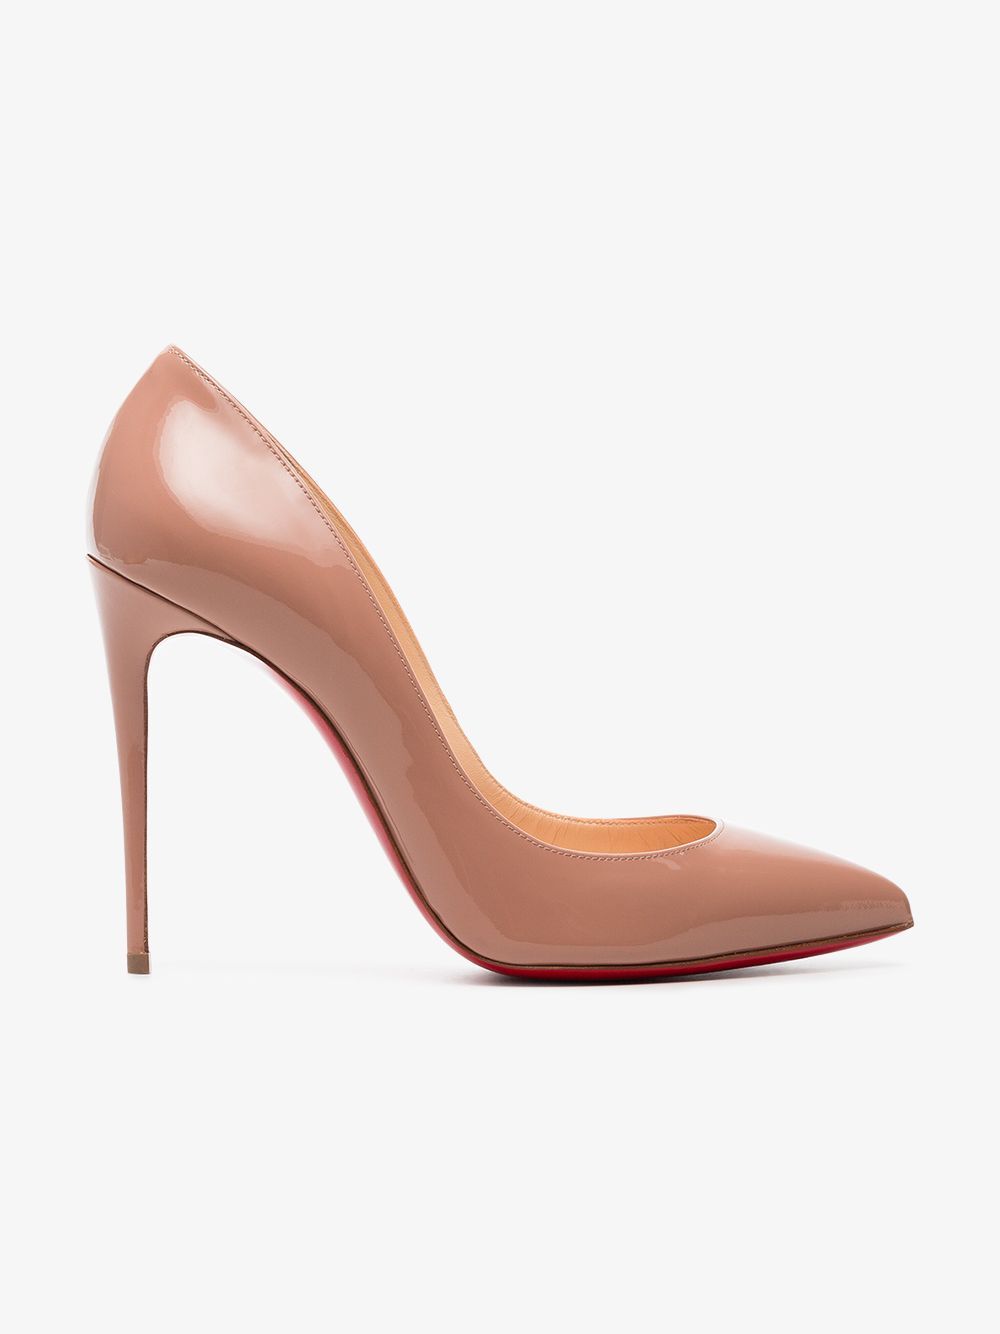 Christian Louboutin Nude Pigalle Follies 100 Patent Leather Pumps | Browns Fashion